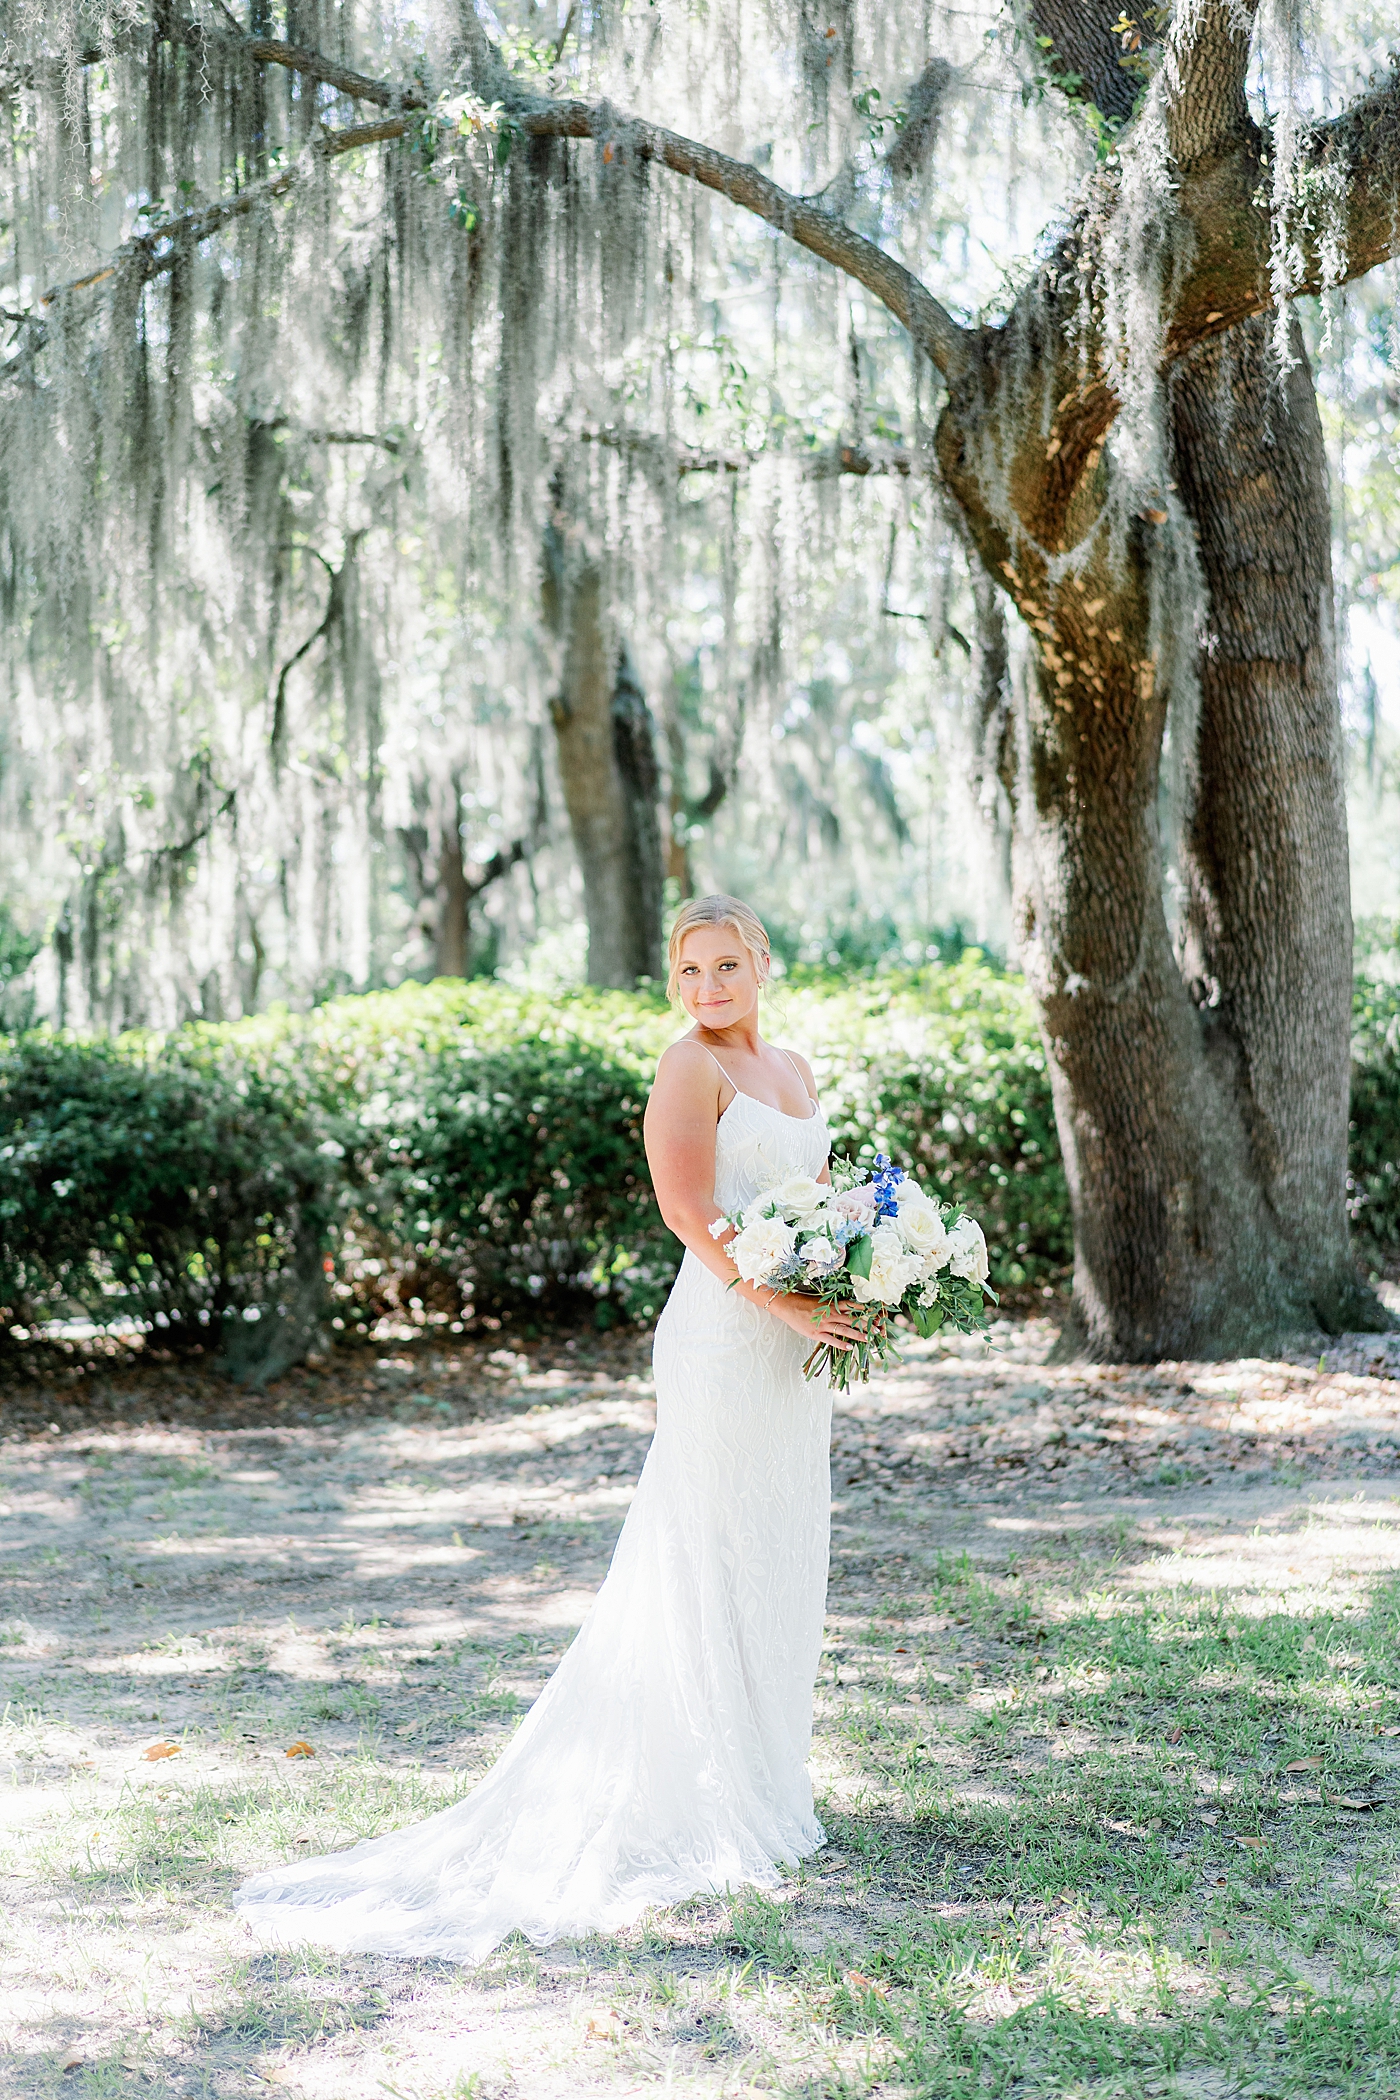 Outdoor bridal portraits | Images by Annie Laura Photography